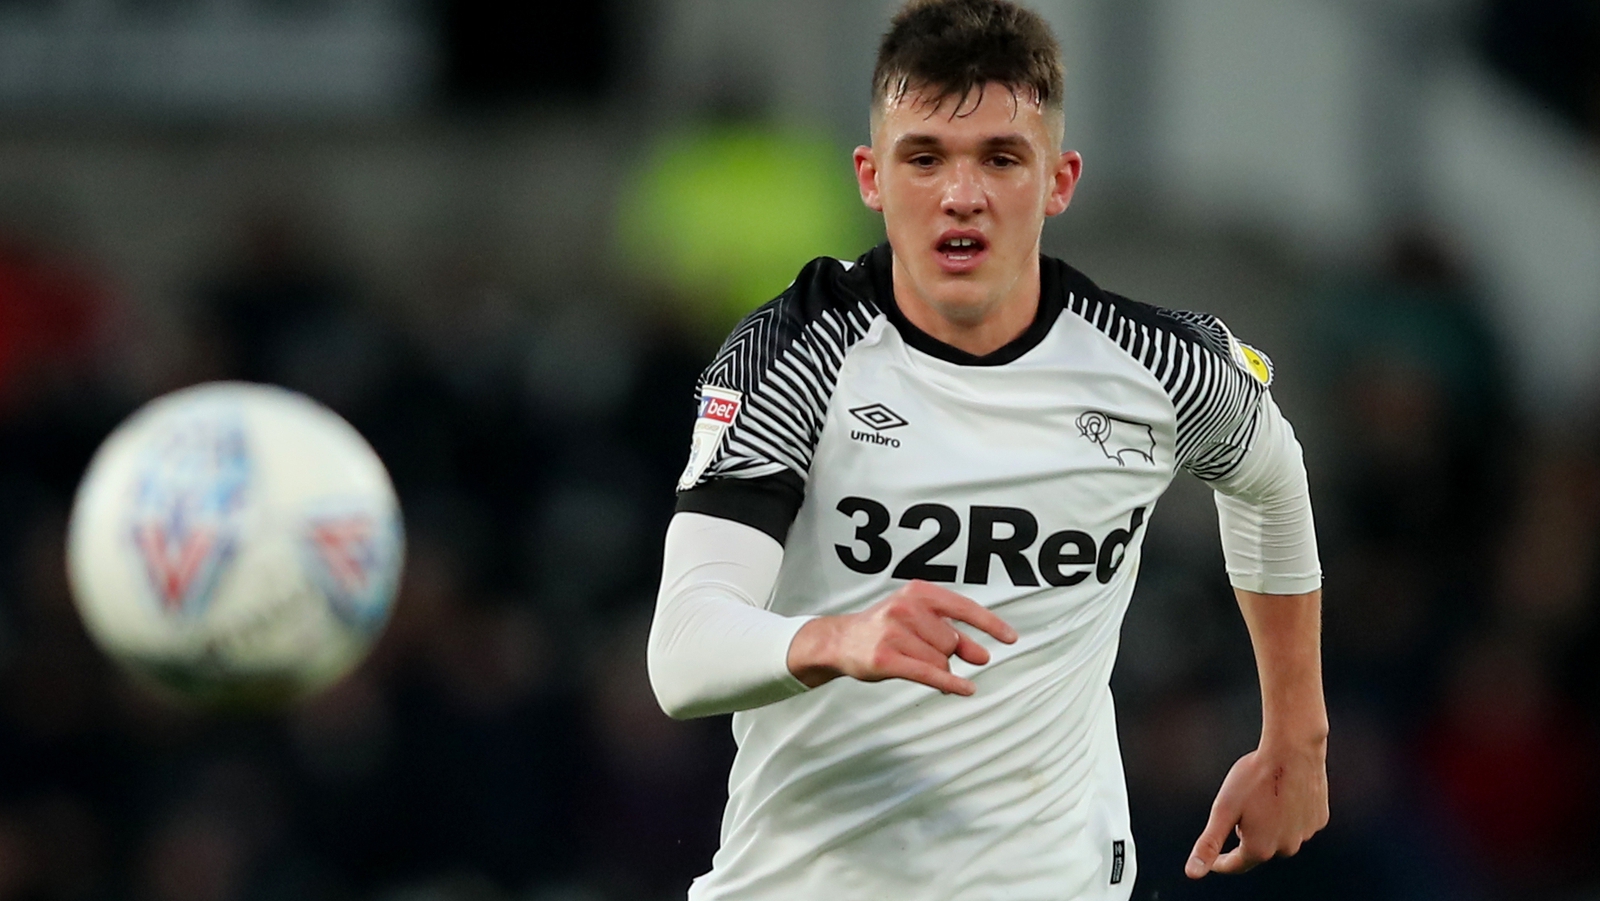 Knight signs long-term contract with Derby County